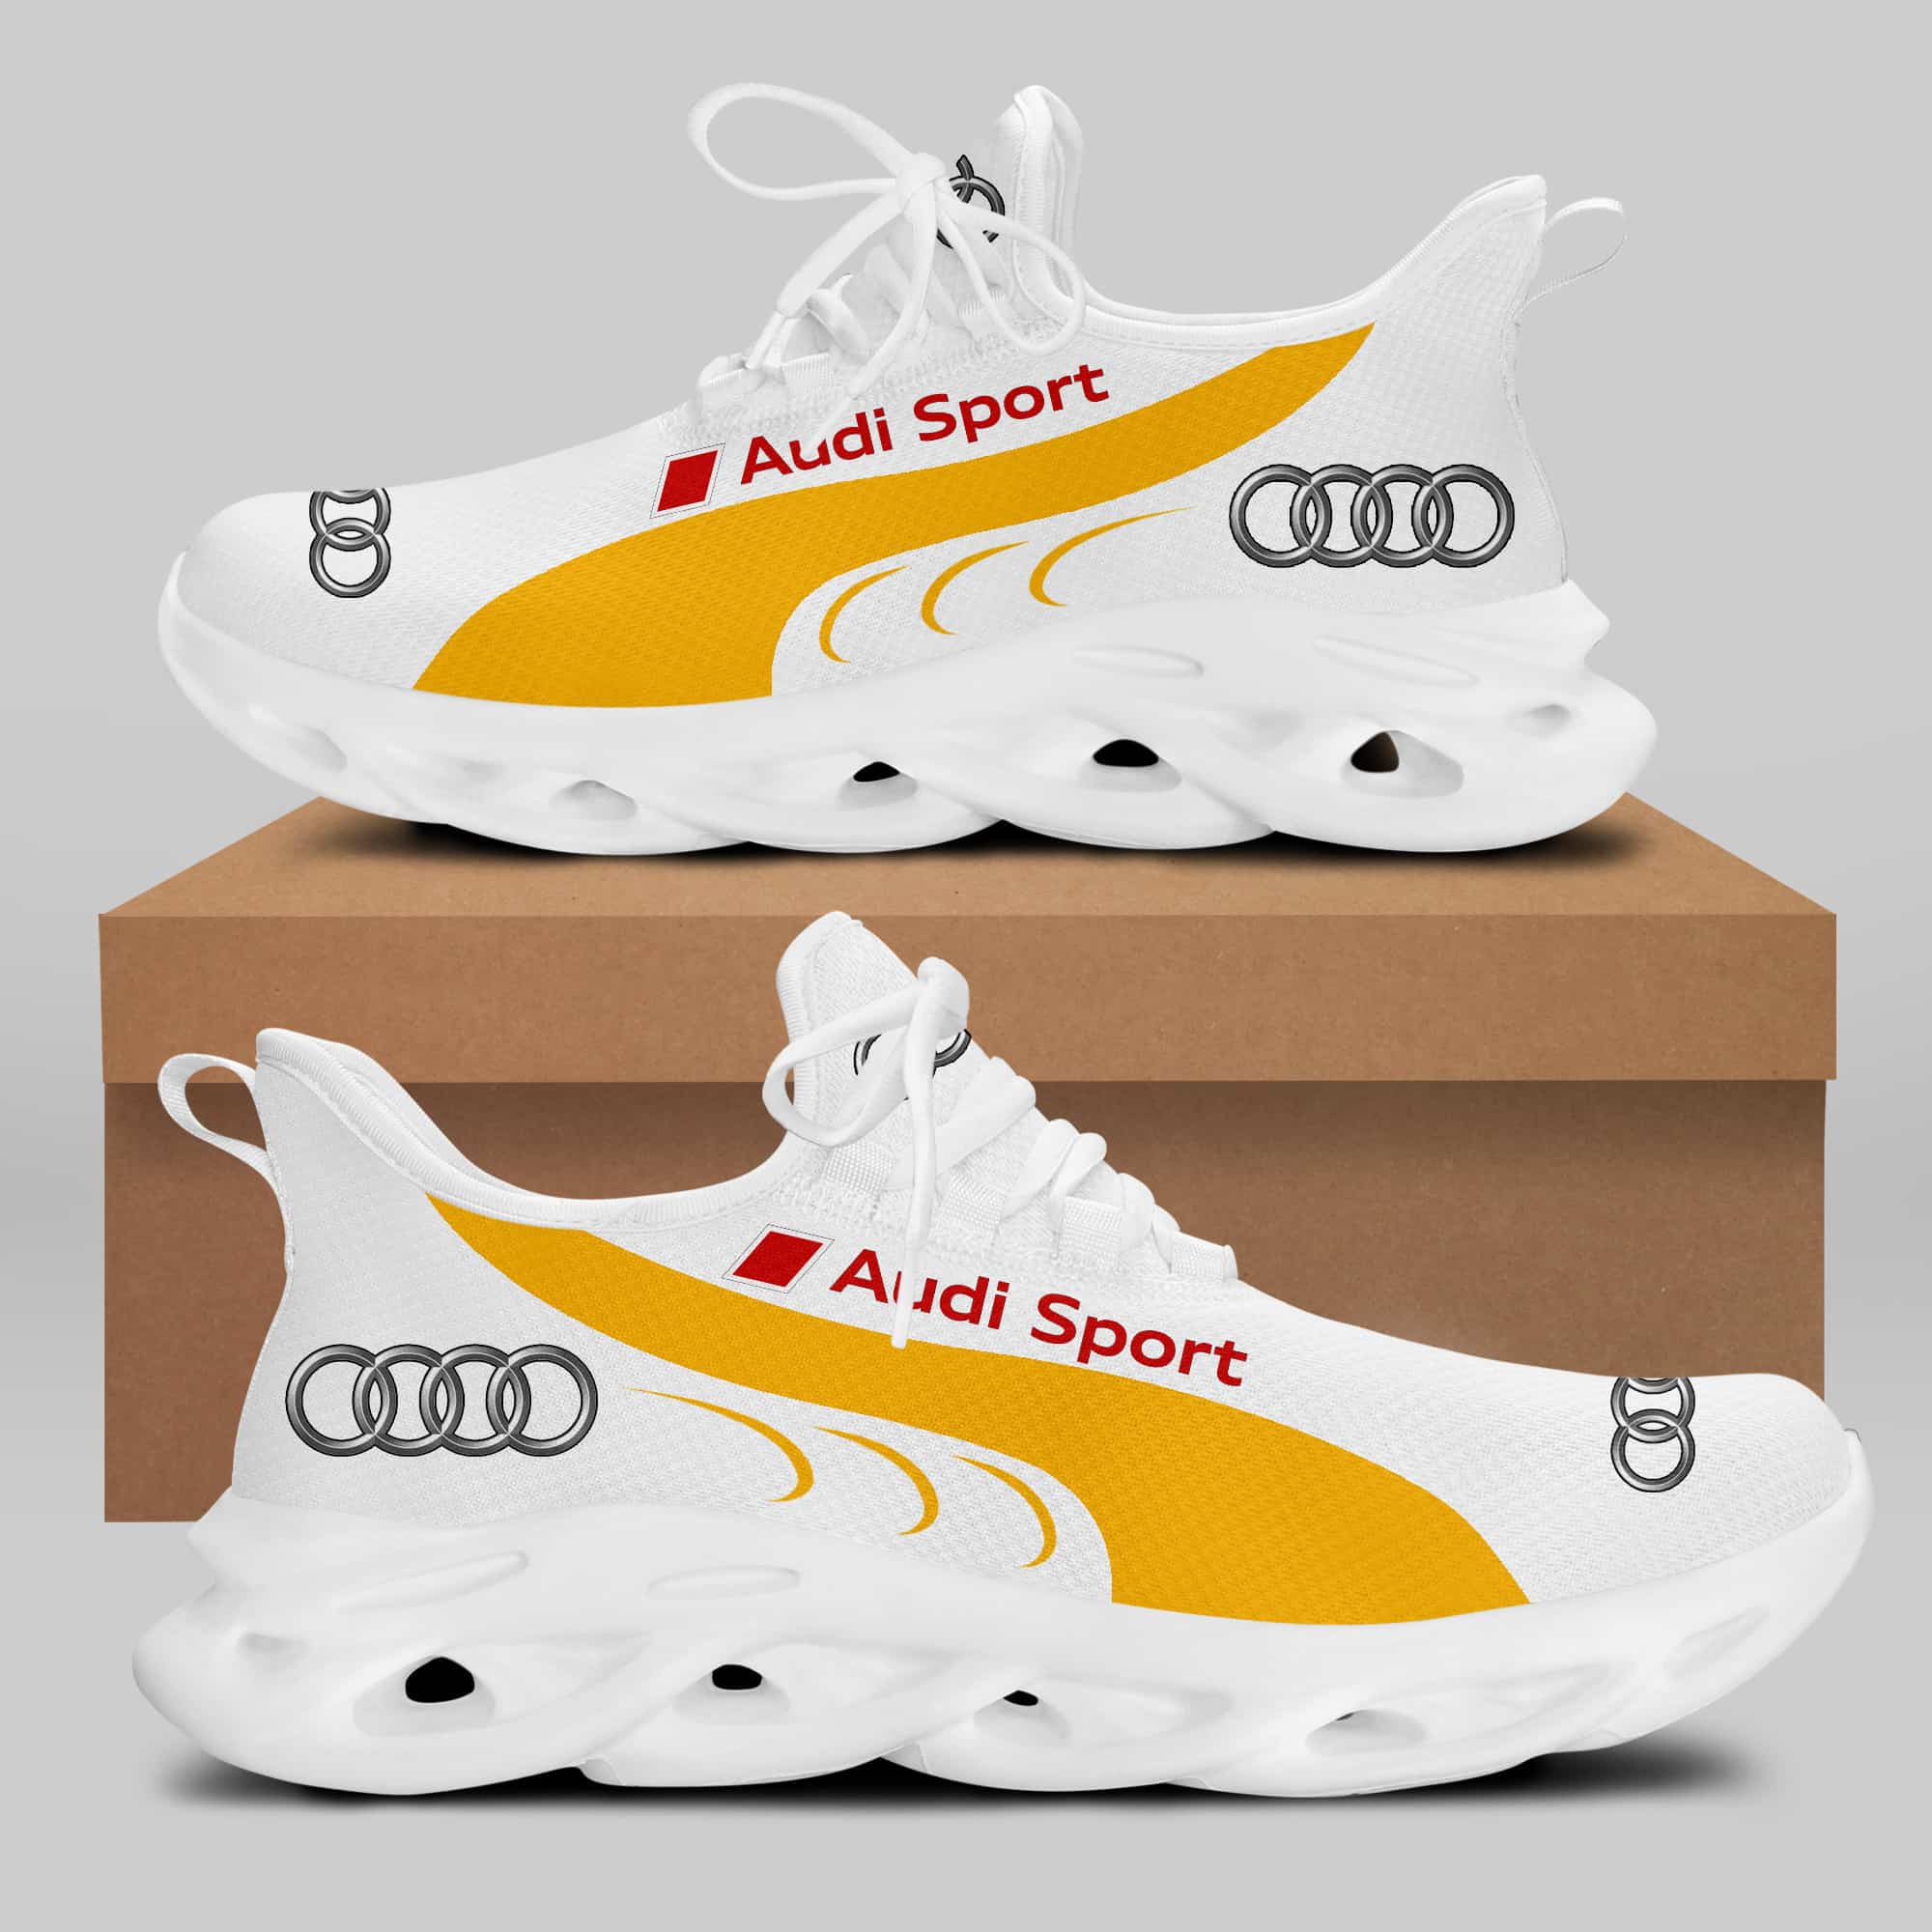 Audi Sport Running Shoes Max Soul Shoes Sneakers Ver 24 1